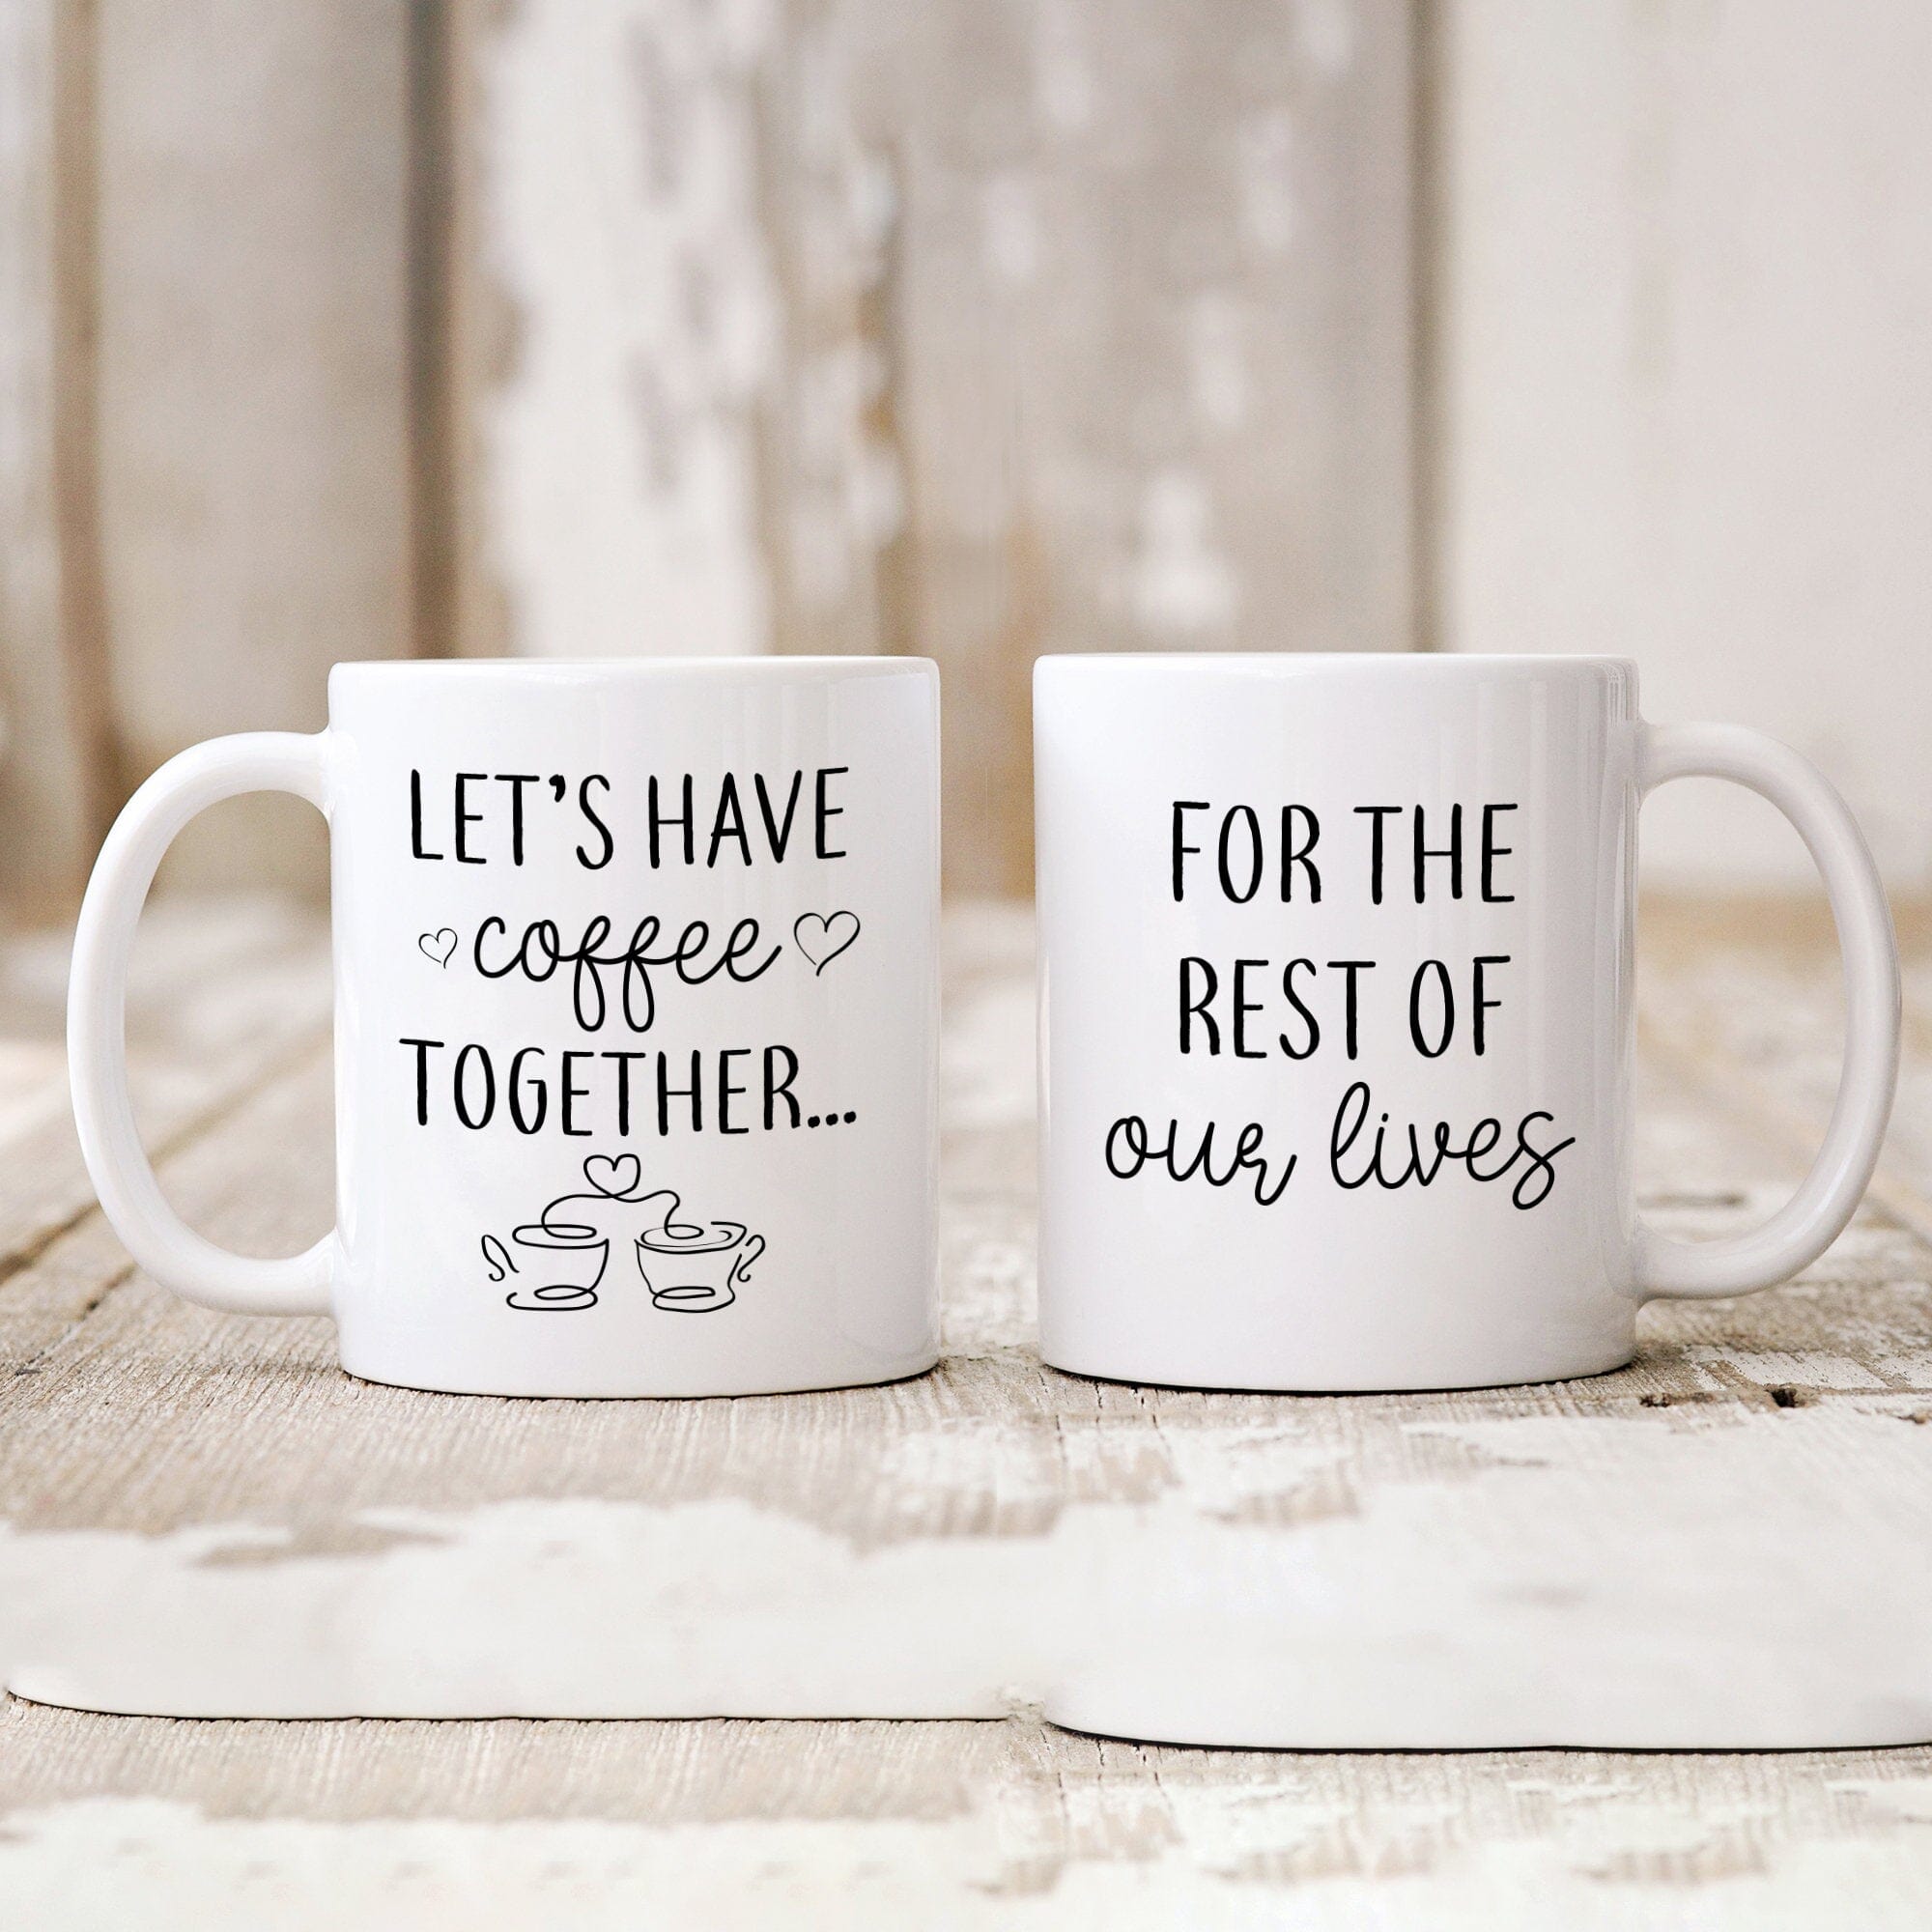 Let's Make Coffee Together / For the Rest of our Lives Couple Mug